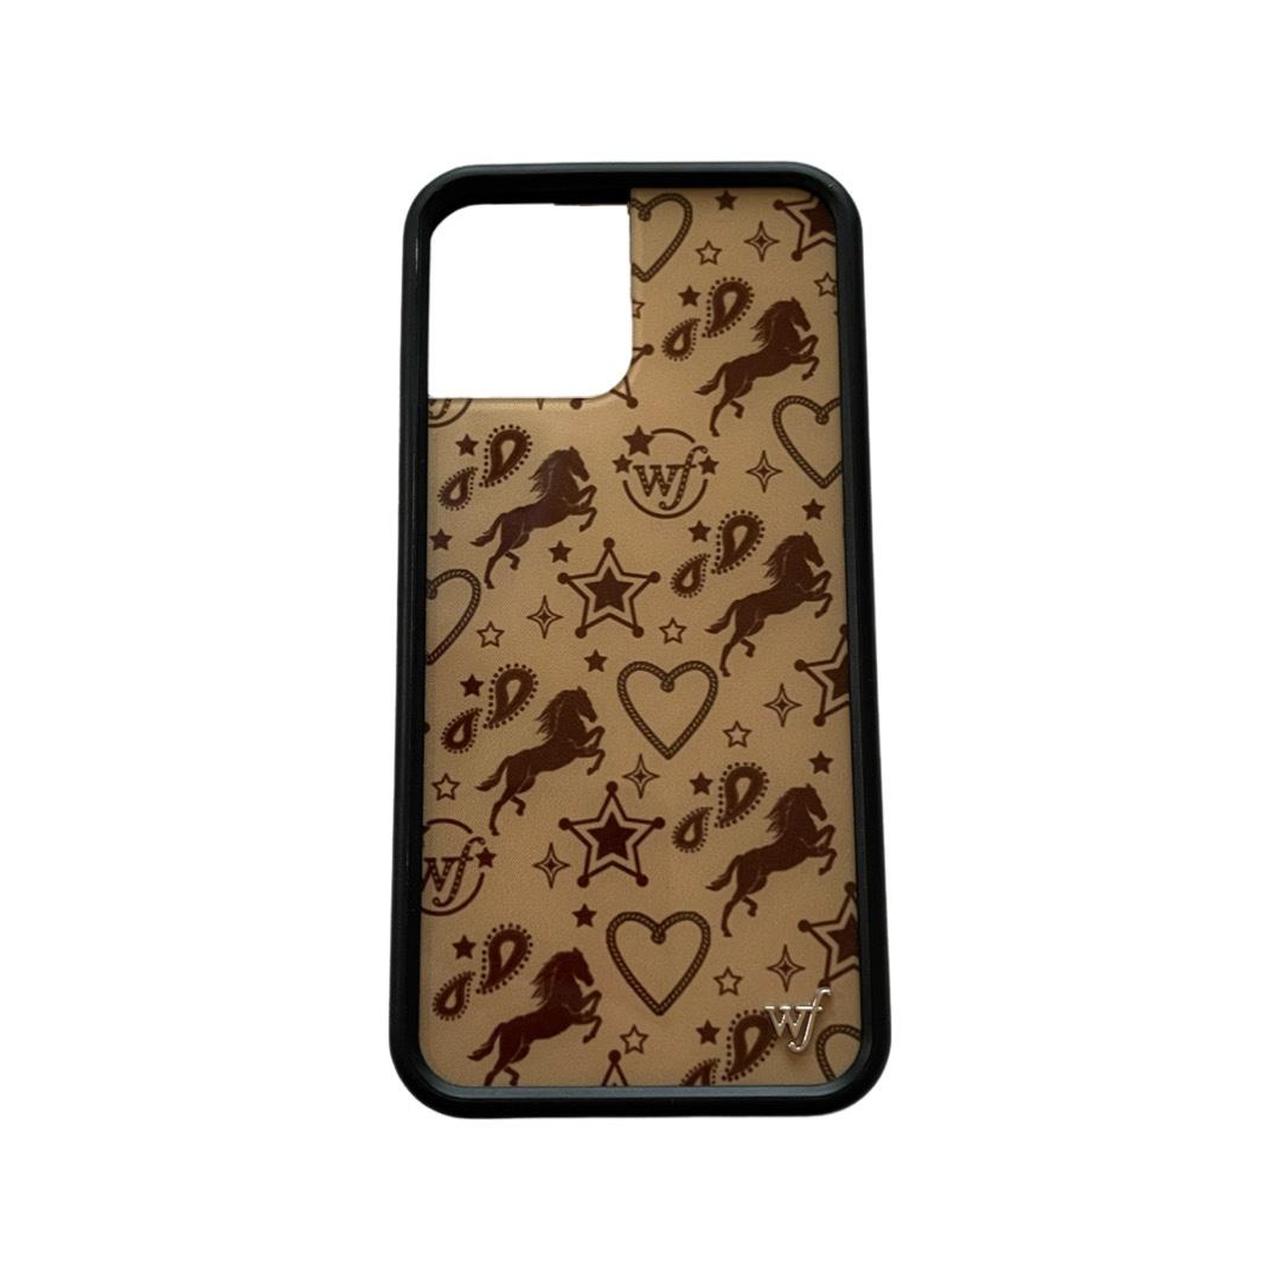 Rodeo Drive iPhone 12 Pro Max Case